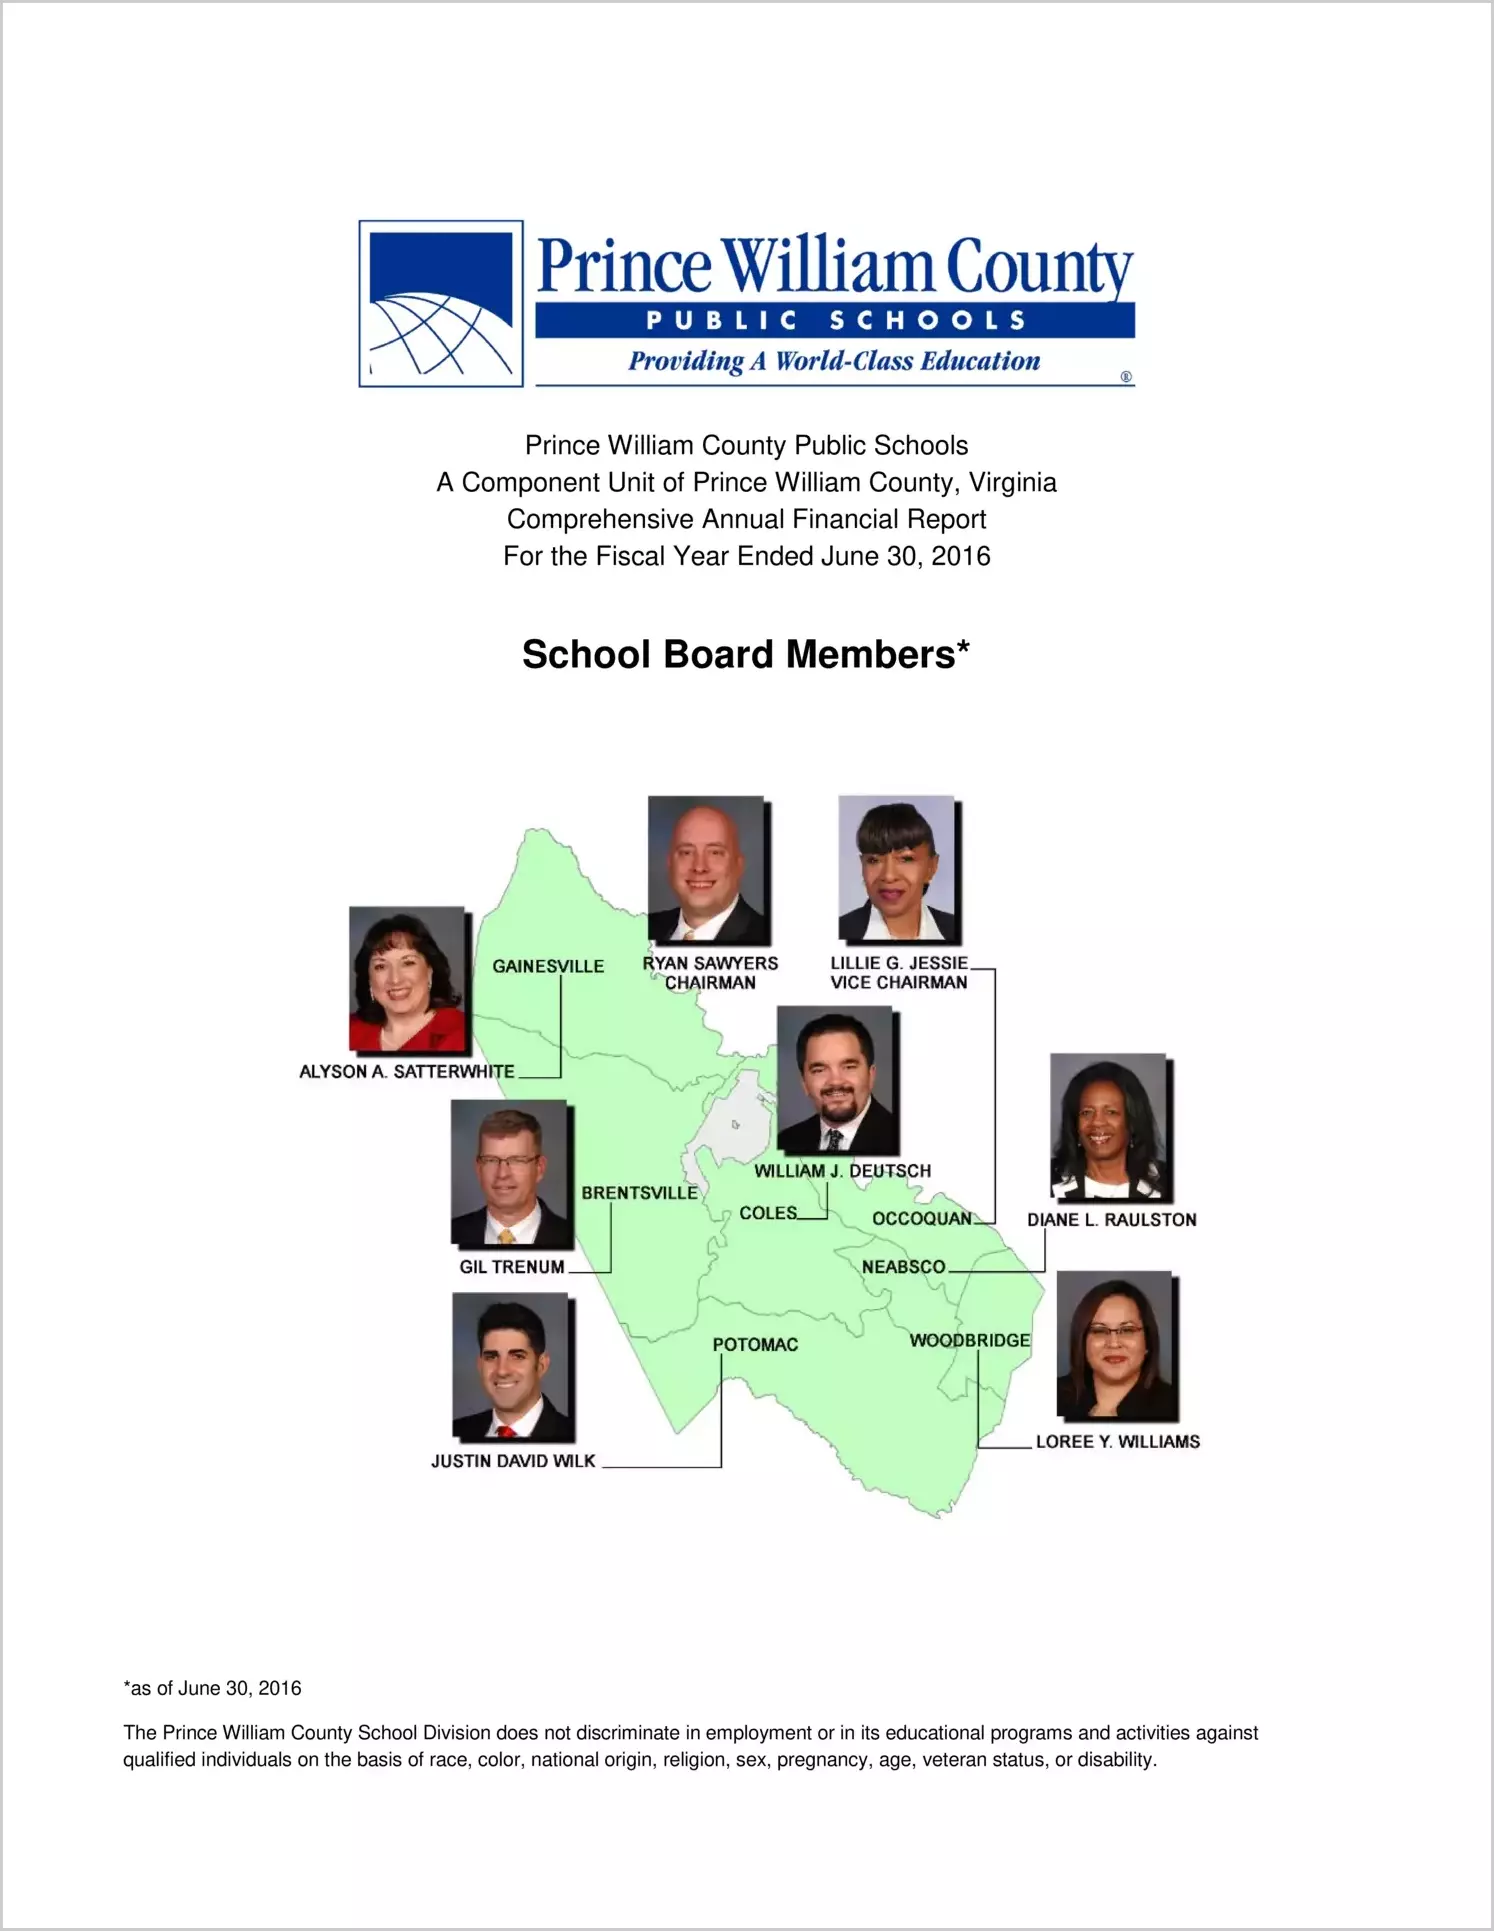 2016 Public Schools Annual Financial Report for County of Prince William